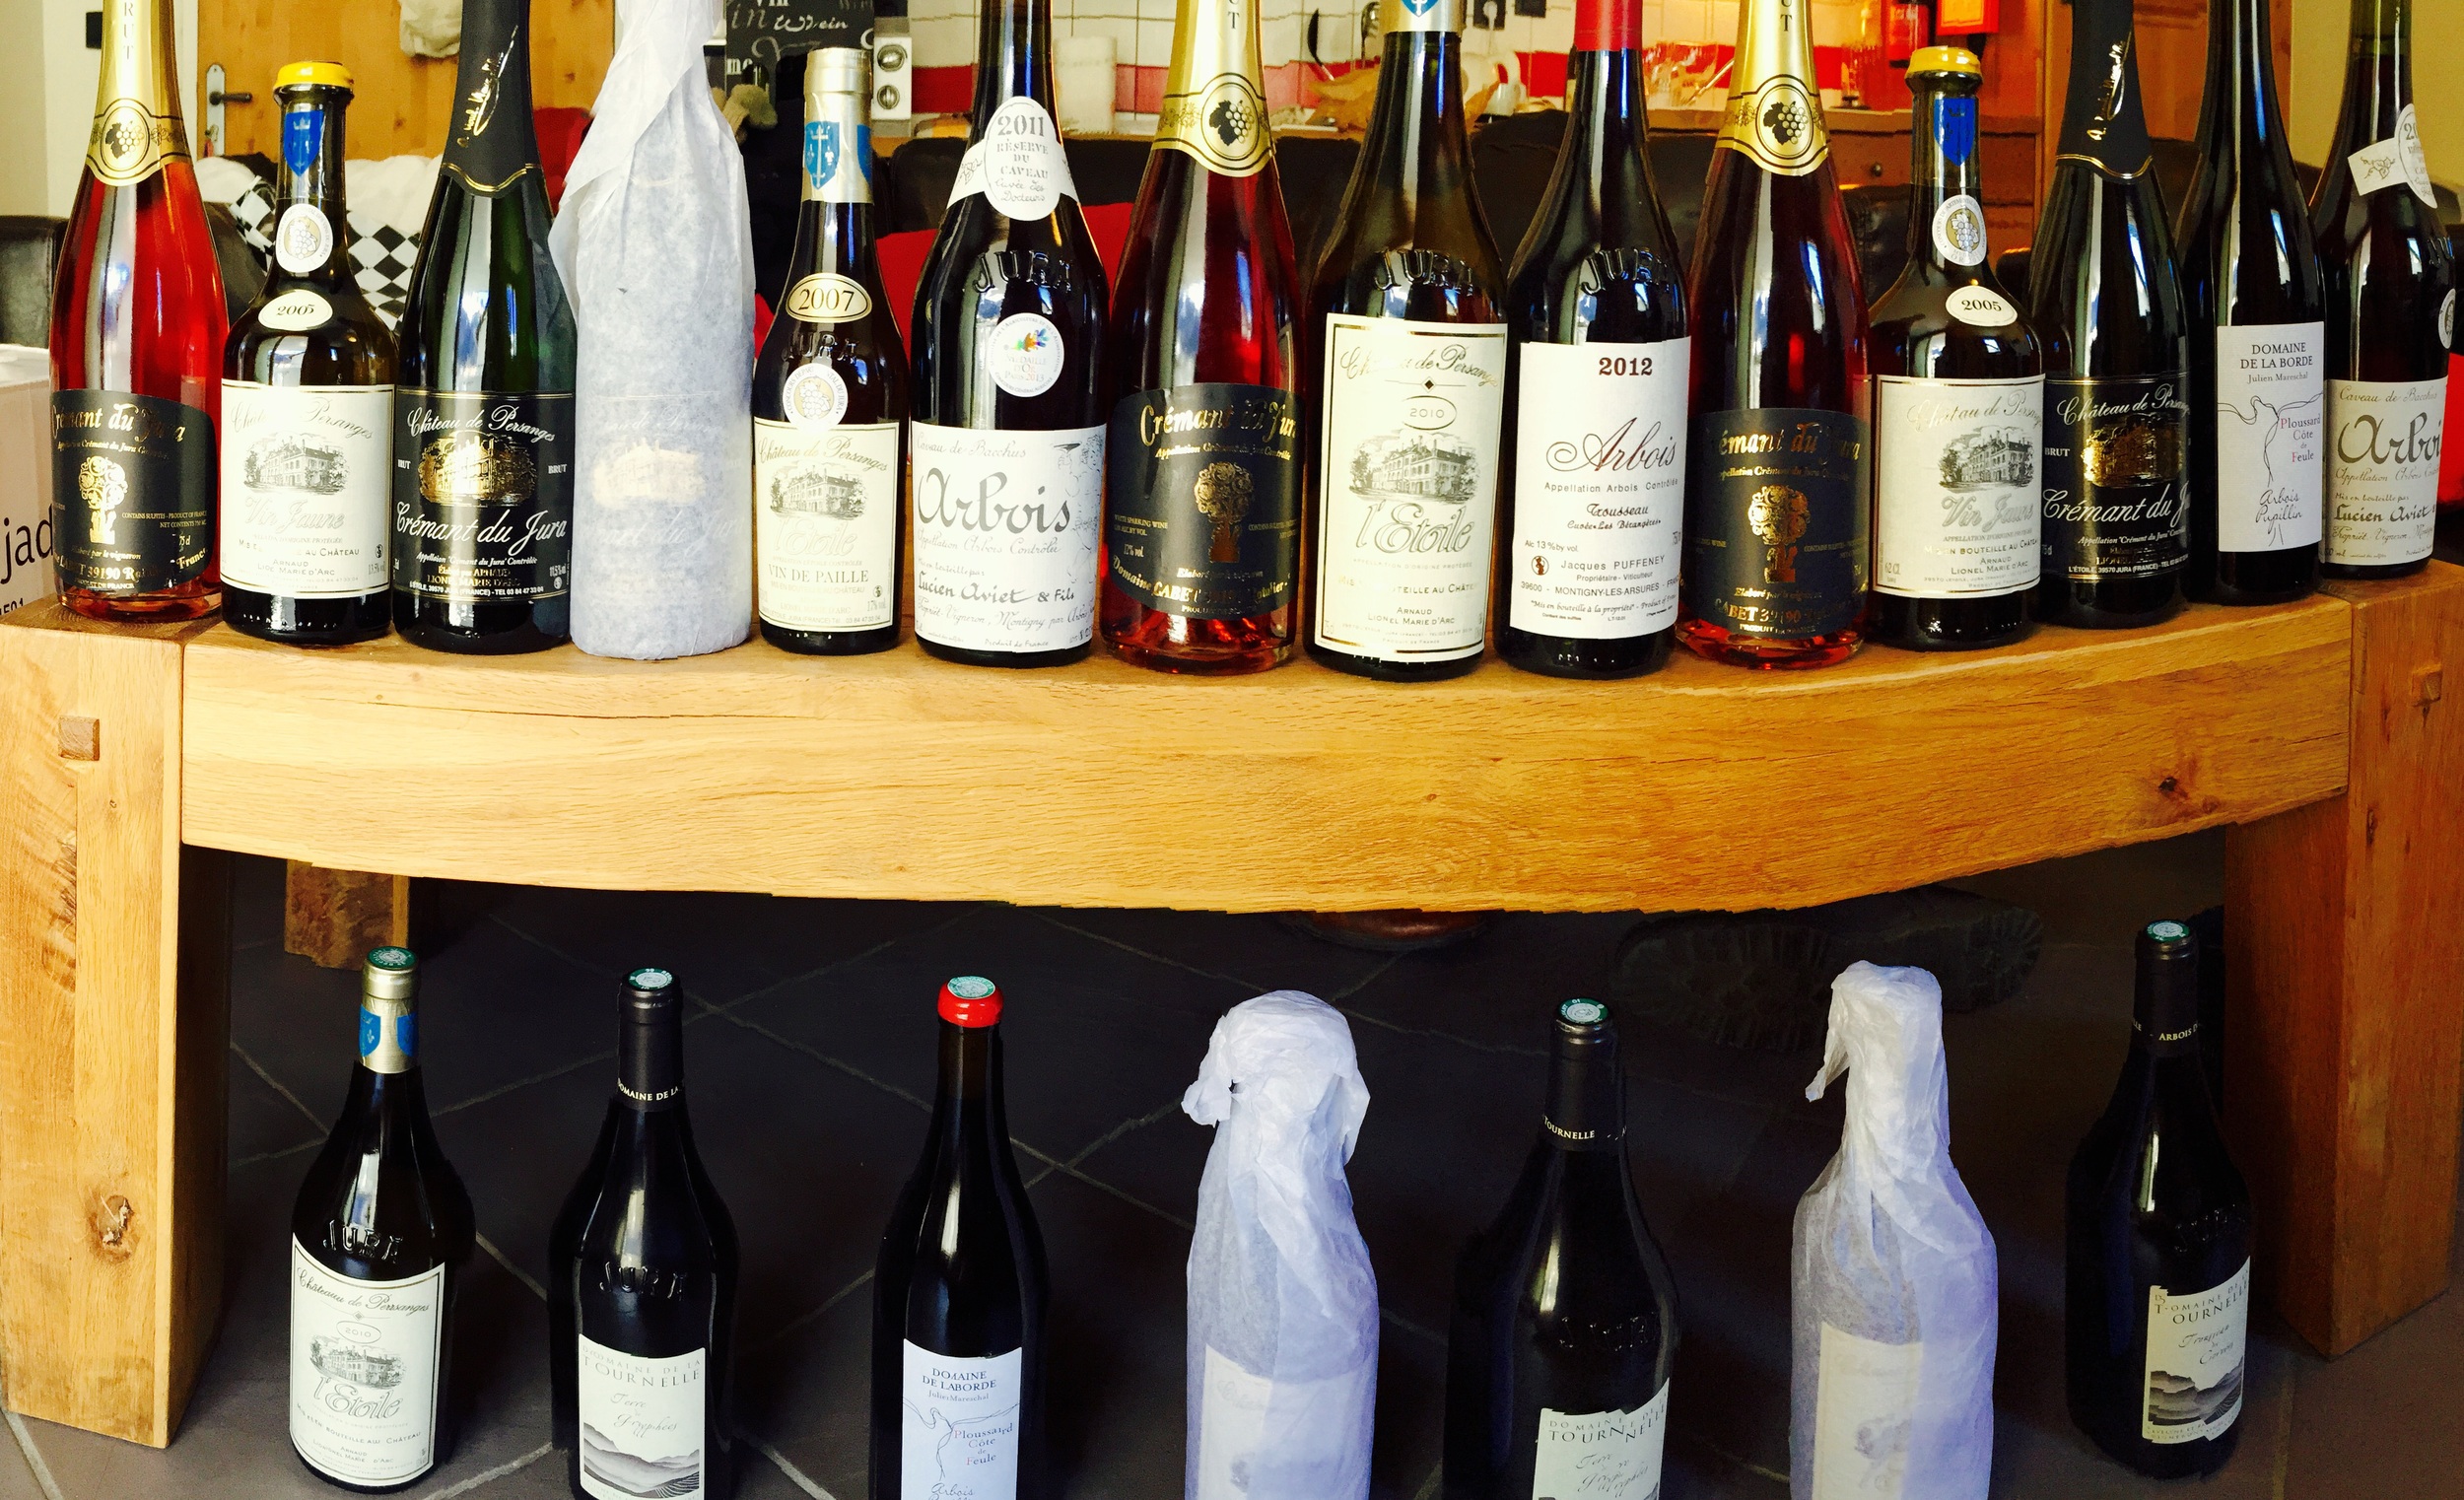  The selection of wines we are bringing back to share with you all at our next few farm dinners! &nbsp;We can't wait! 